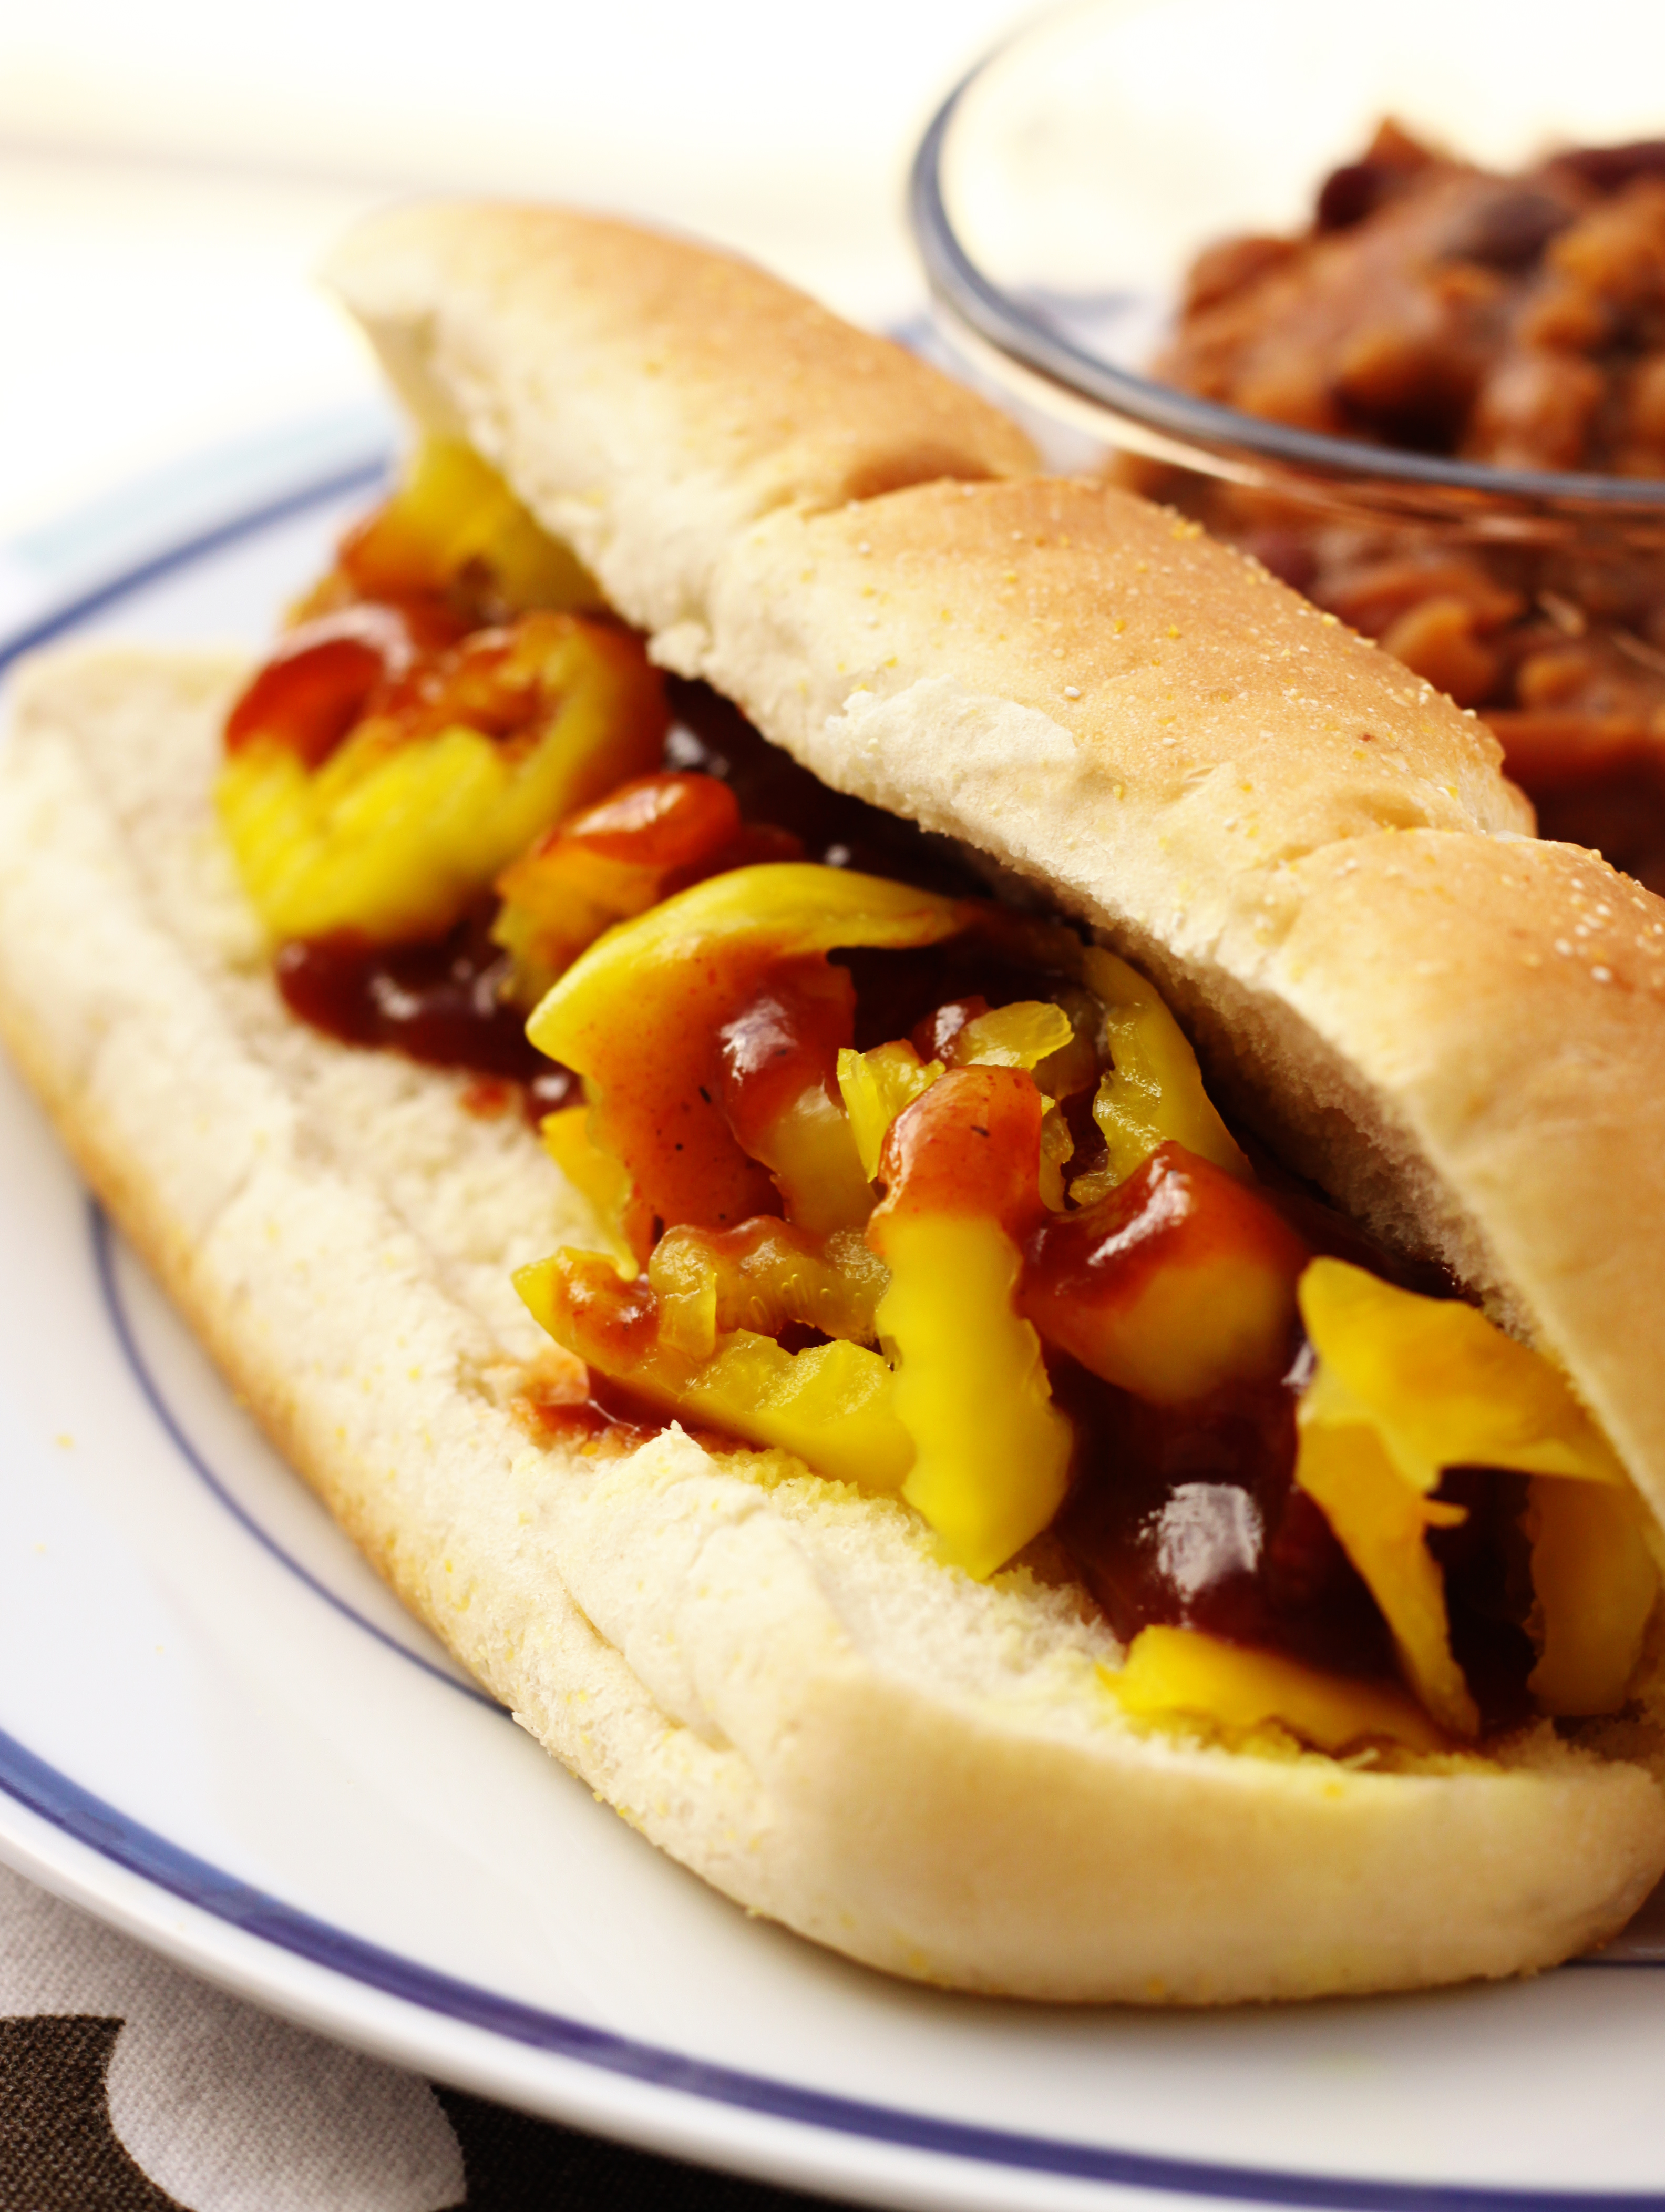 Hot Dog Wallpapers High Quality | Download Free